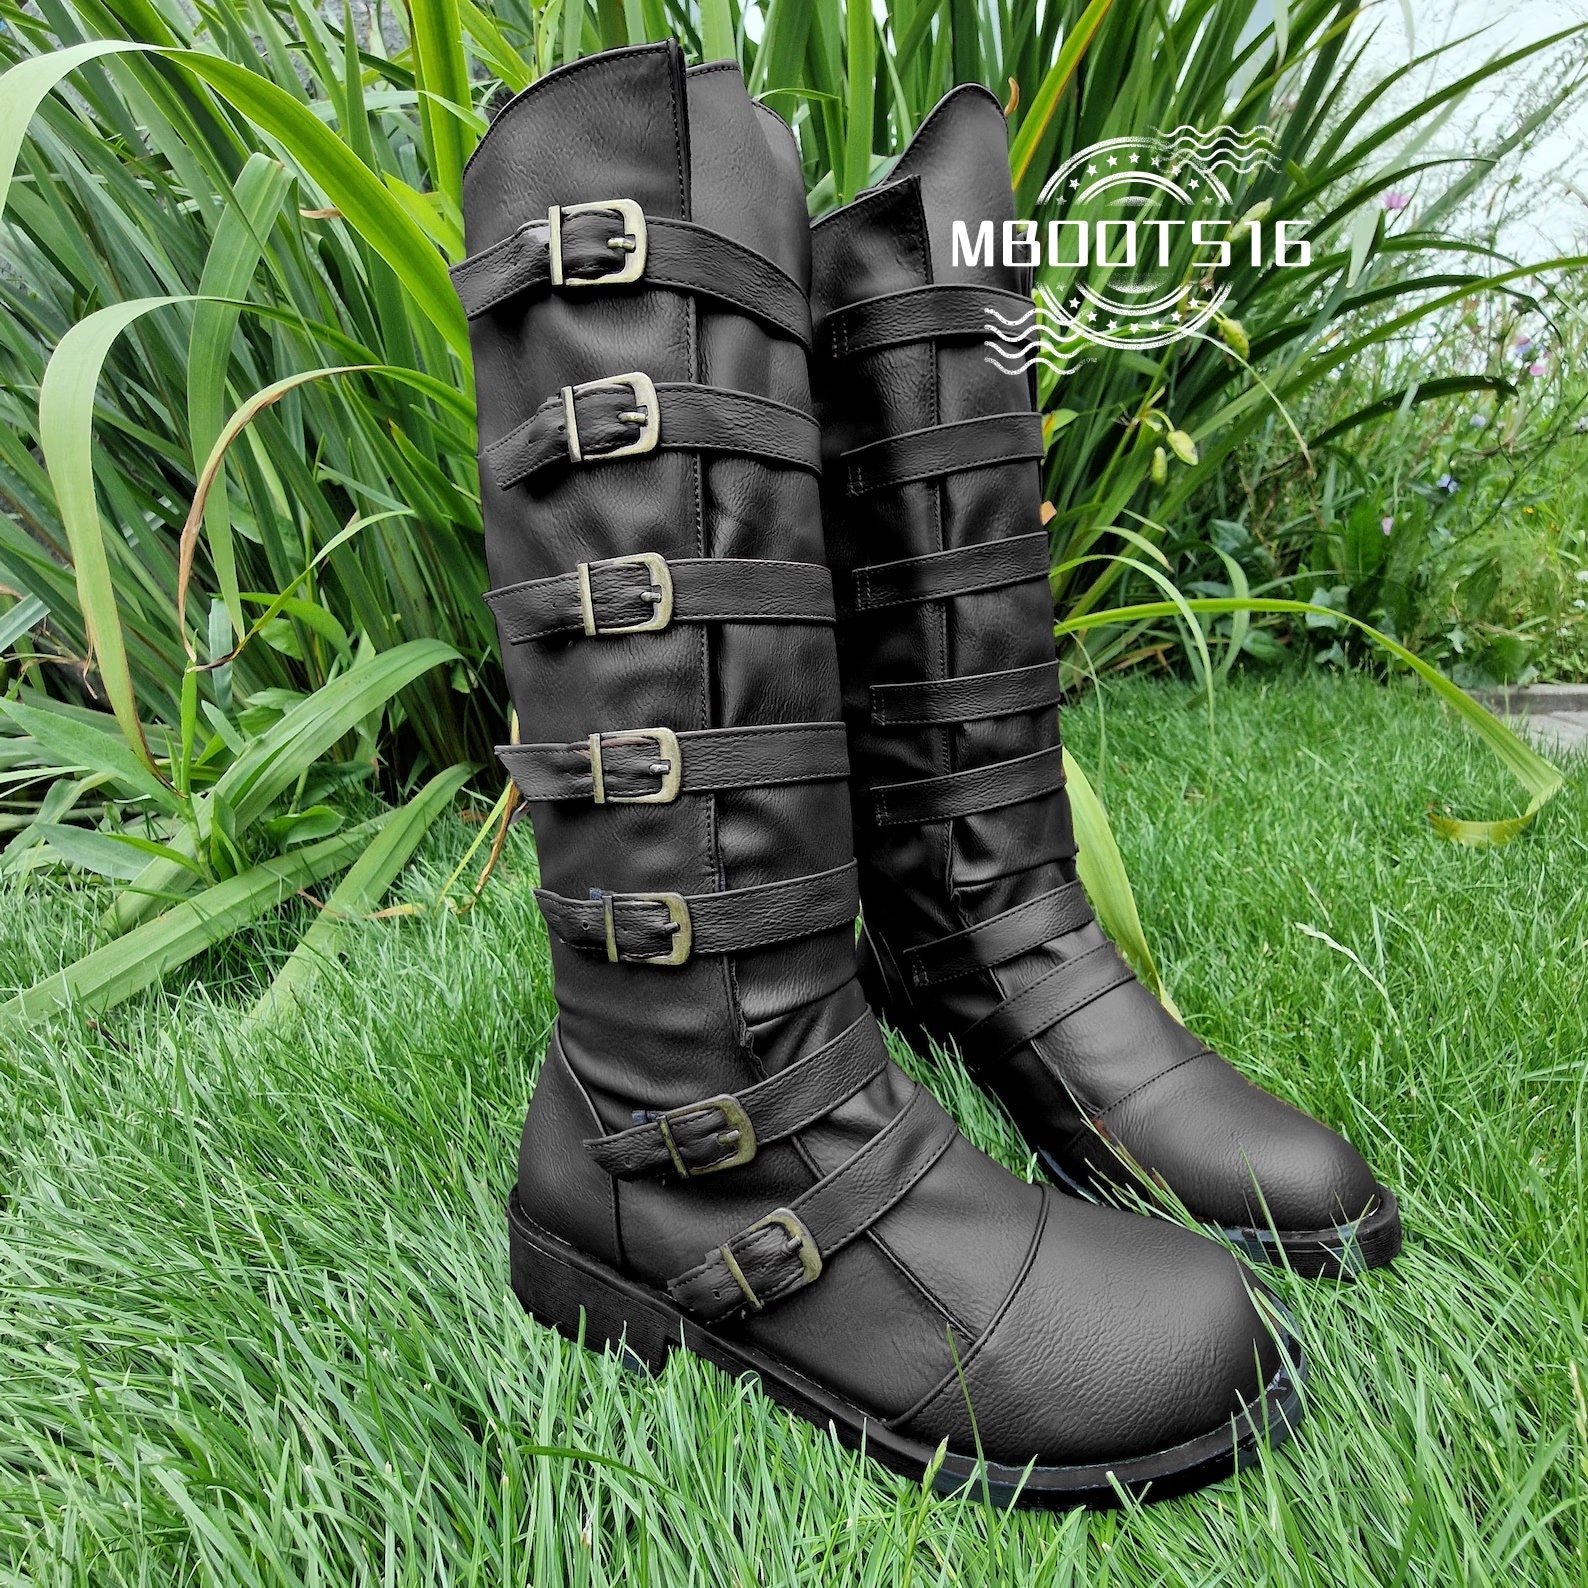 Medieval Boots Renaissance Boots Pirate Boots Viking Boots - Etsy